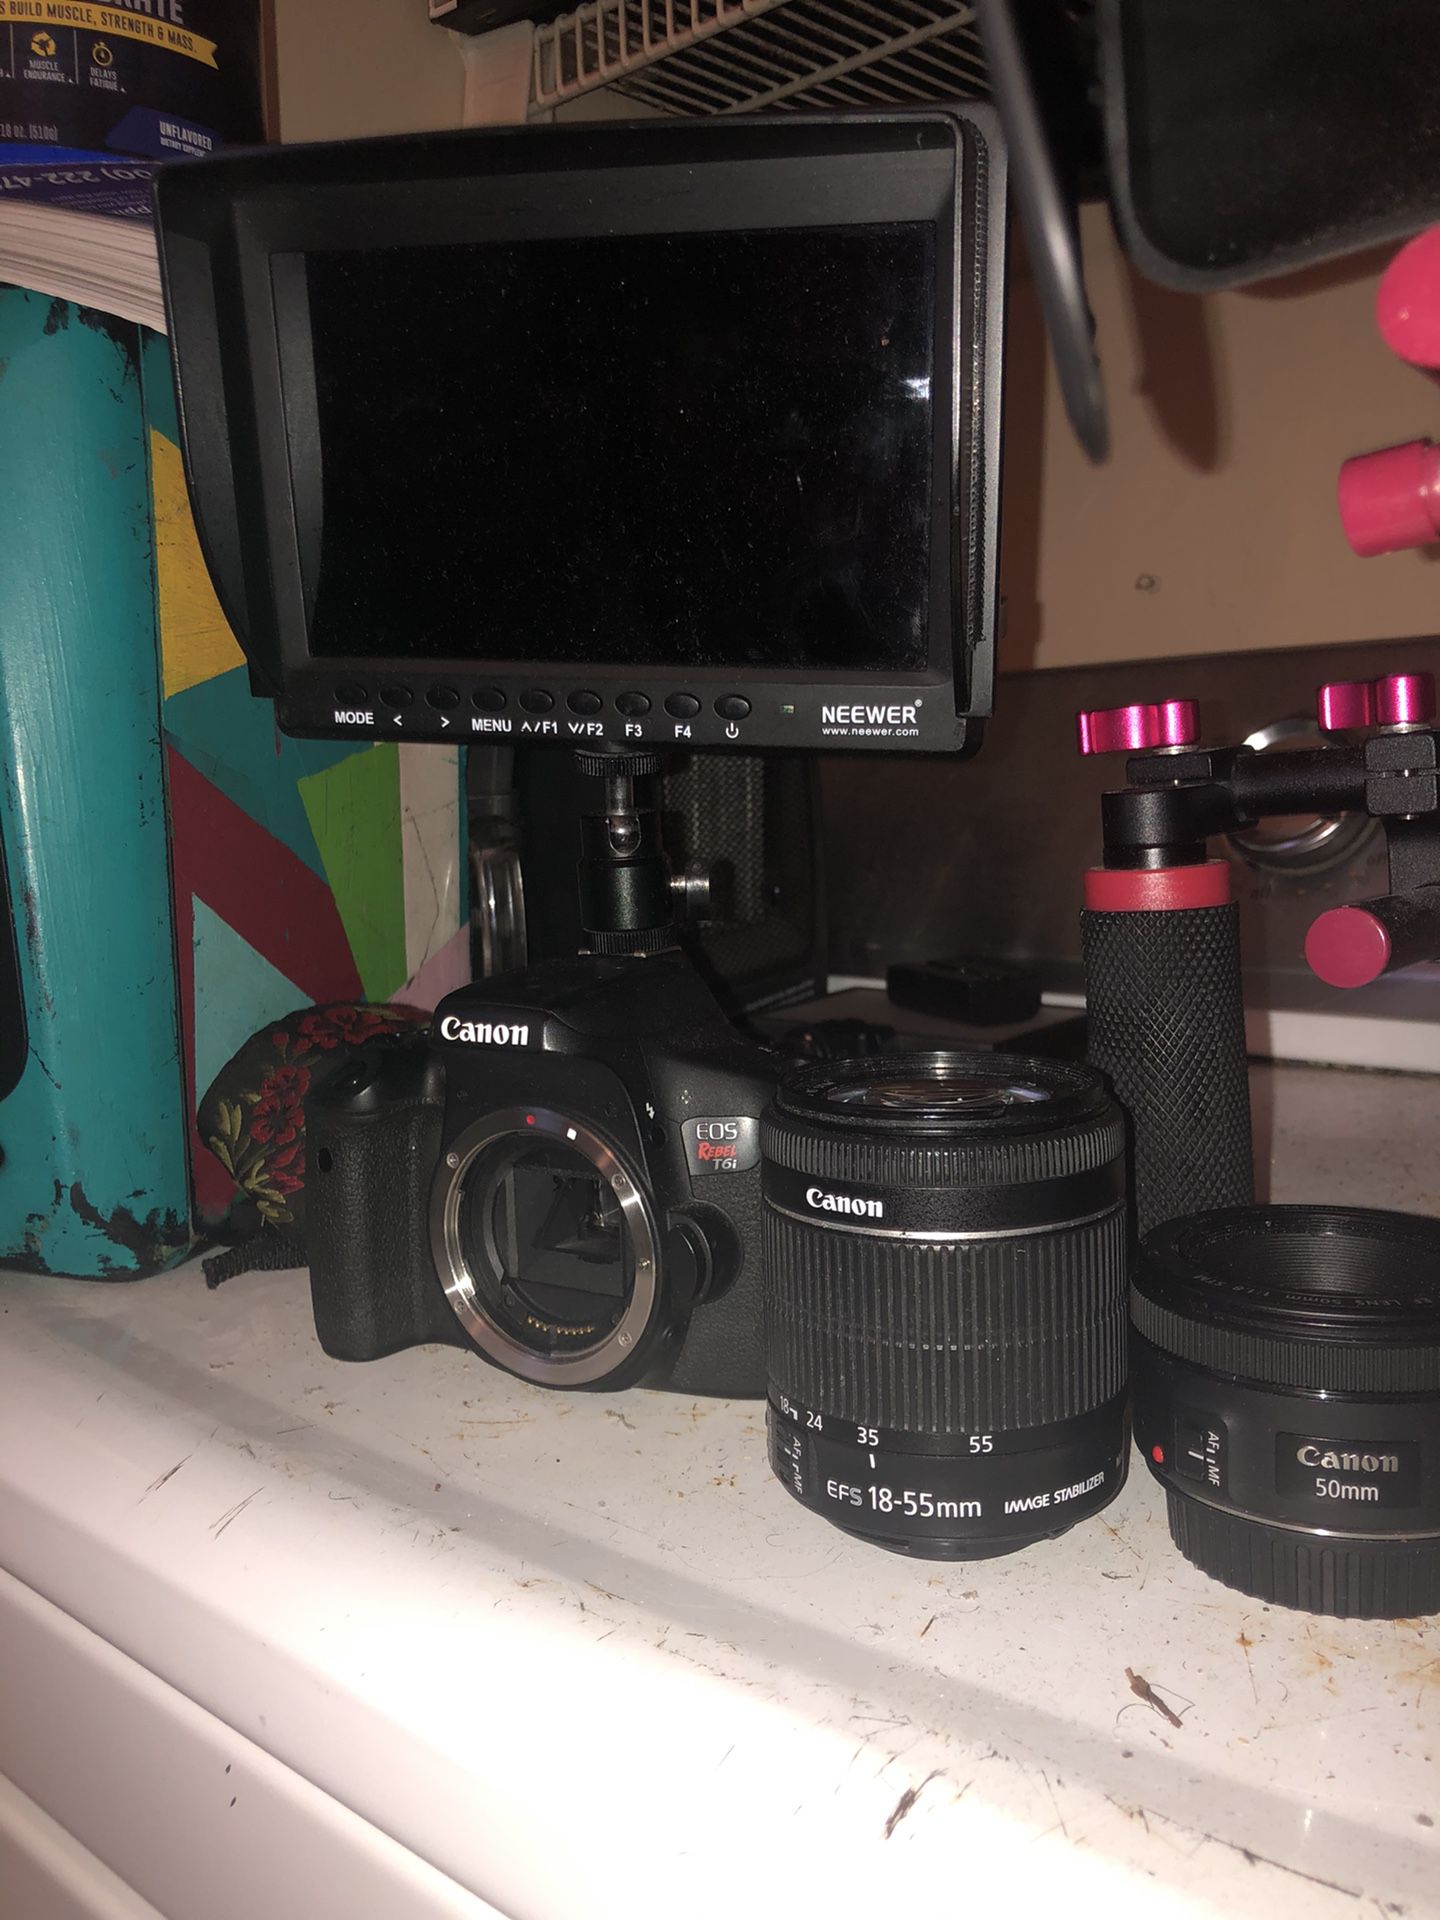 Canon Rebel T6i , canon lens 18-55mm & 50mm , Neewer Monitor, Neewer Stabilizer